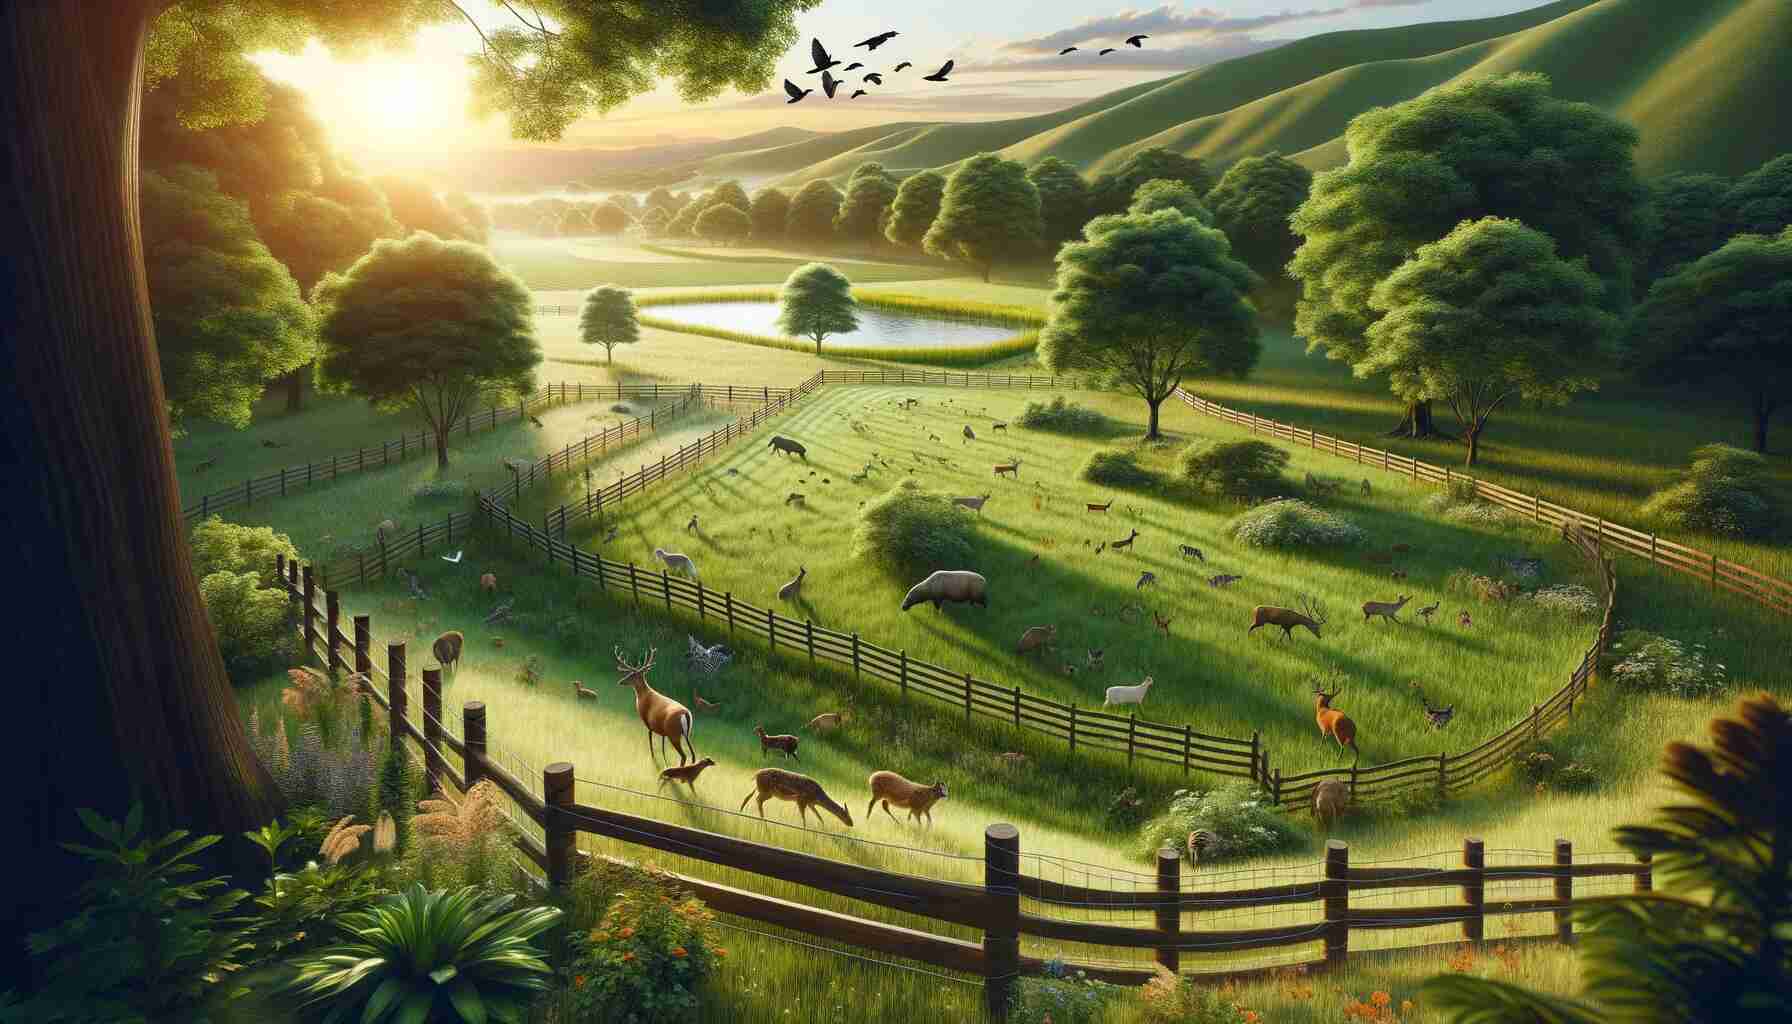 This image depicting the role of private lands in wildlife habitat conservation. It features a serene landscape where lush green fields, a variety of thriving animals, and a well-maintained ecosystem illustrate the harmony between human-managed lands and conservation efforts.